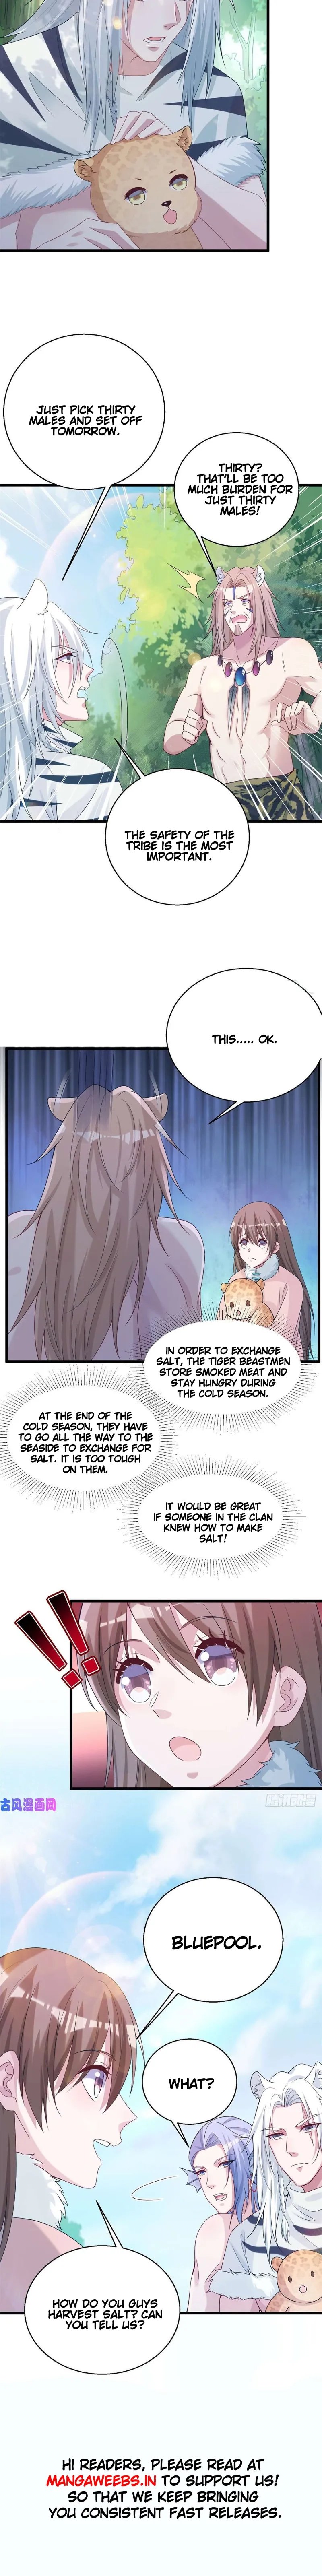 Beauty and the Beasts chapter 282